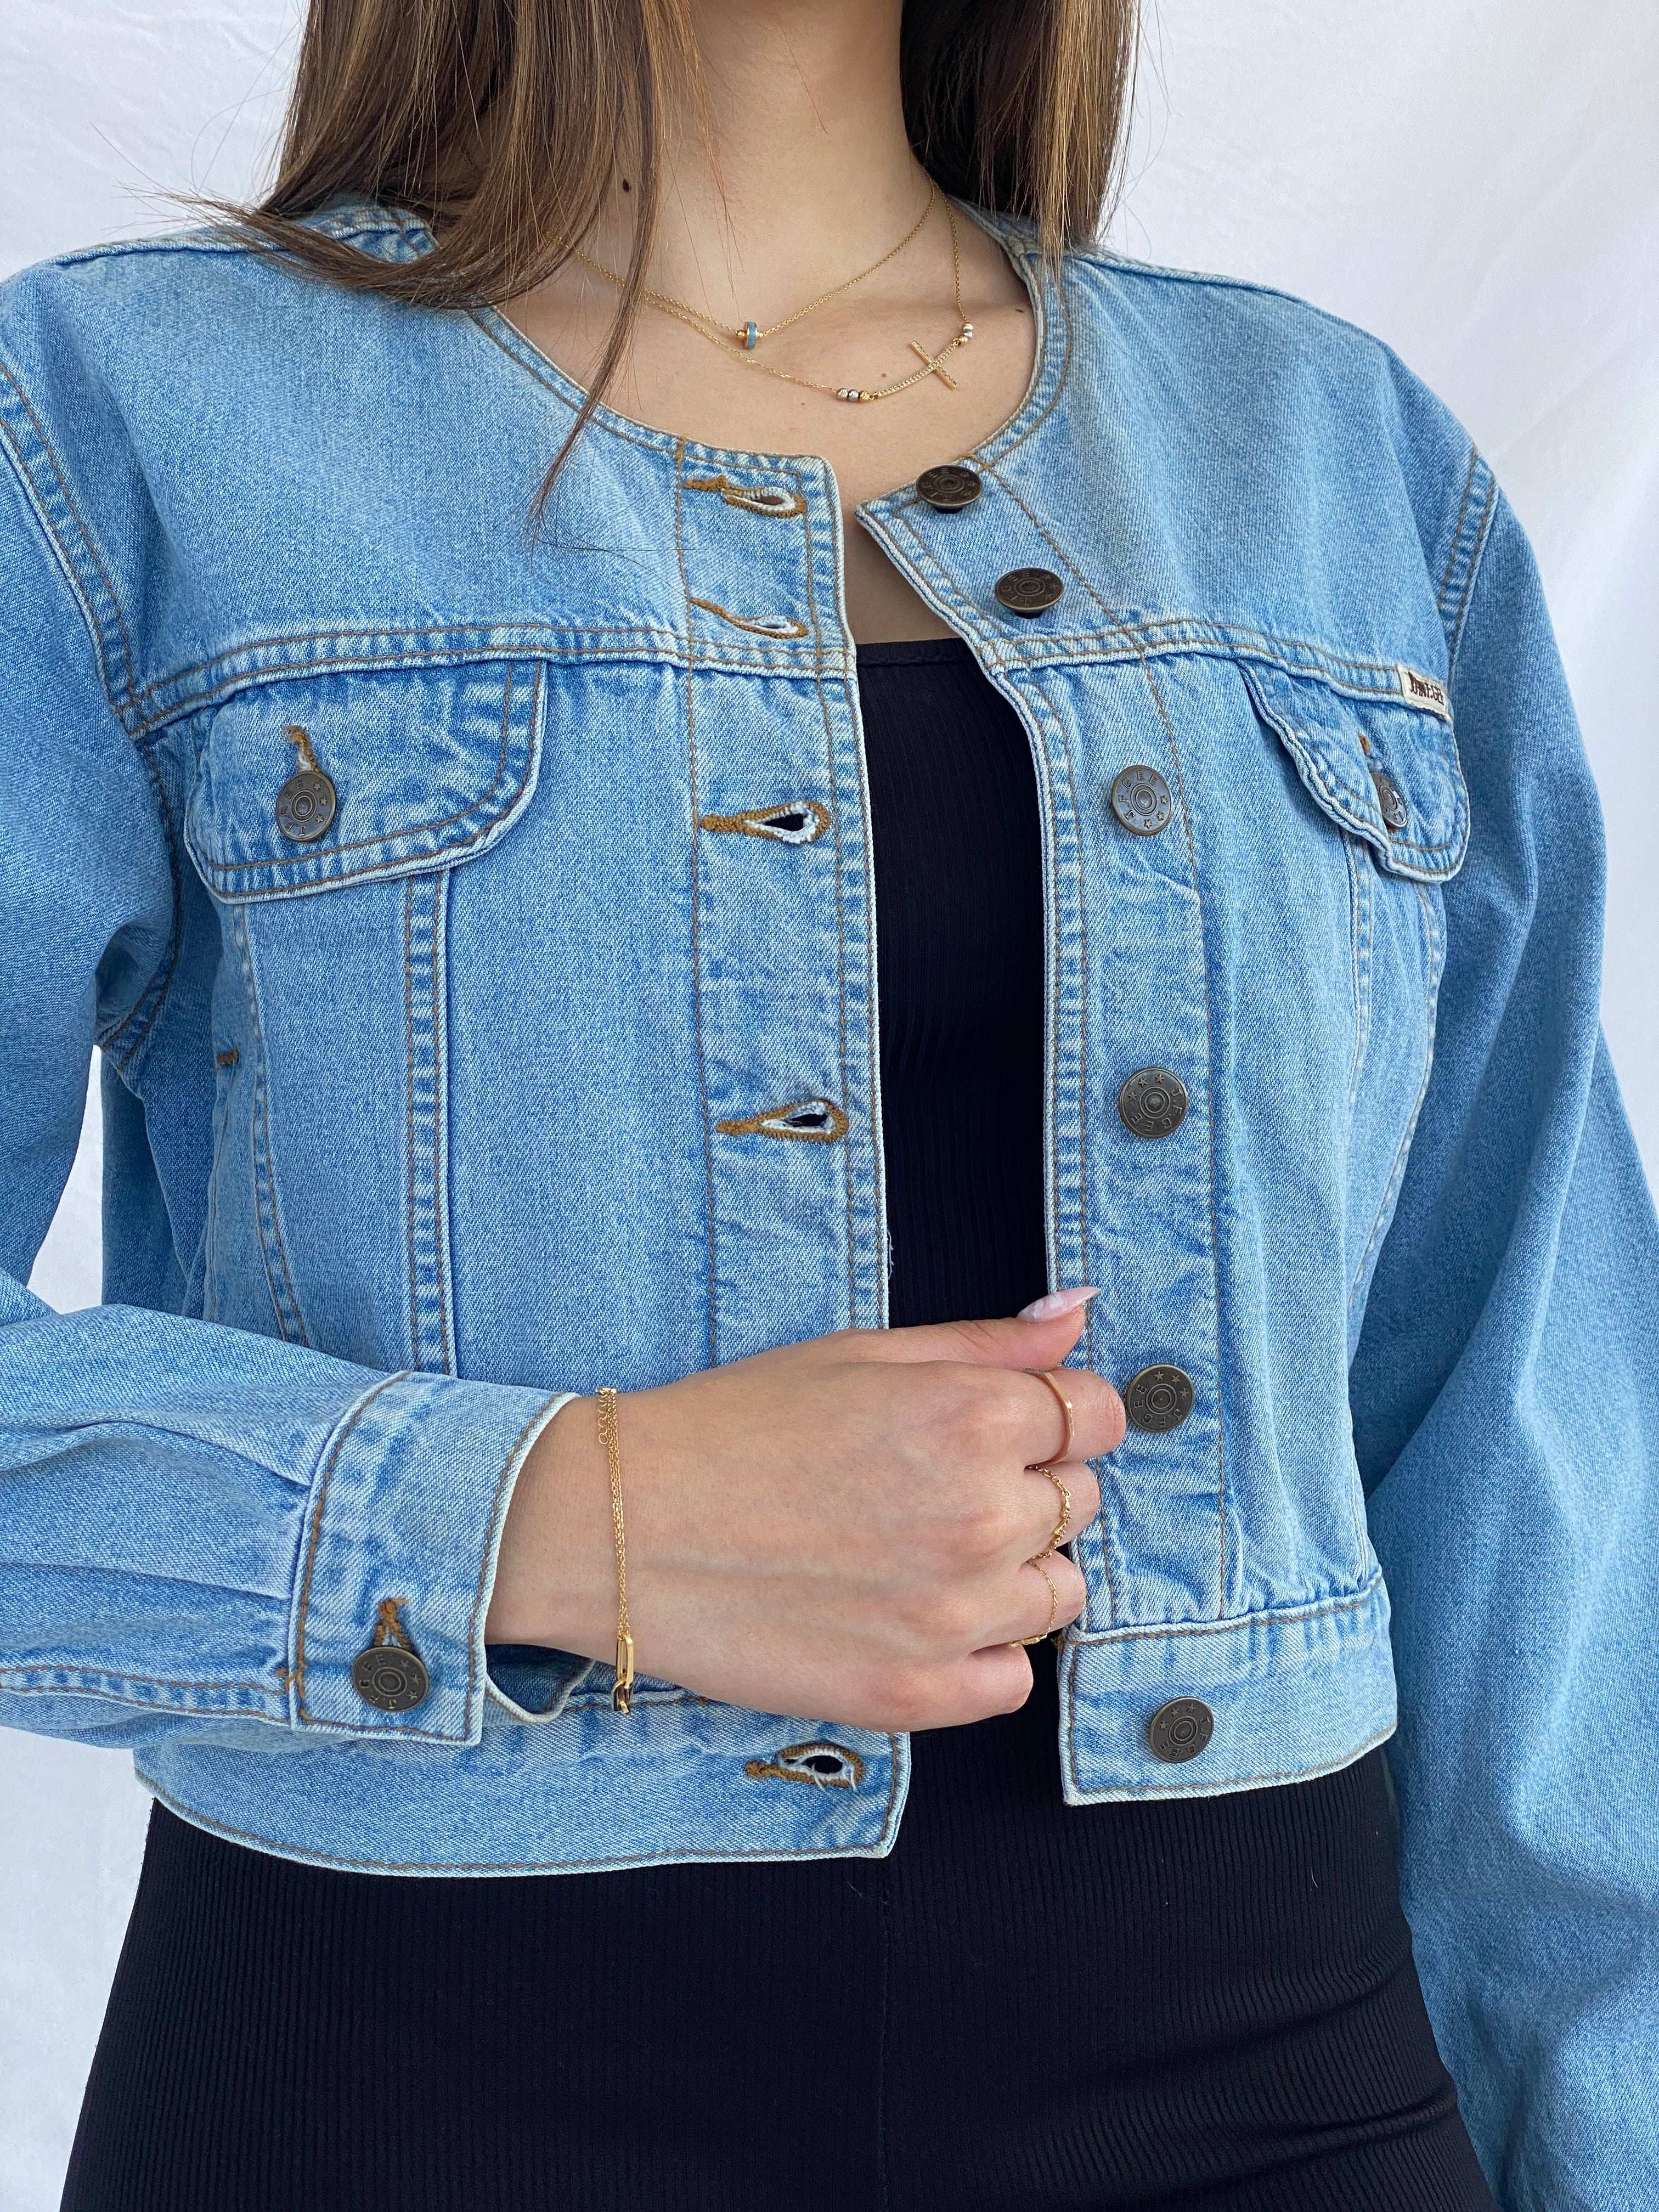 Vintage JOHNF.GEE Cropped Denim Jacket - Size S/M - Balagan Vintage Denim Jacket 00s, denim jacket, Juana, NEW IN